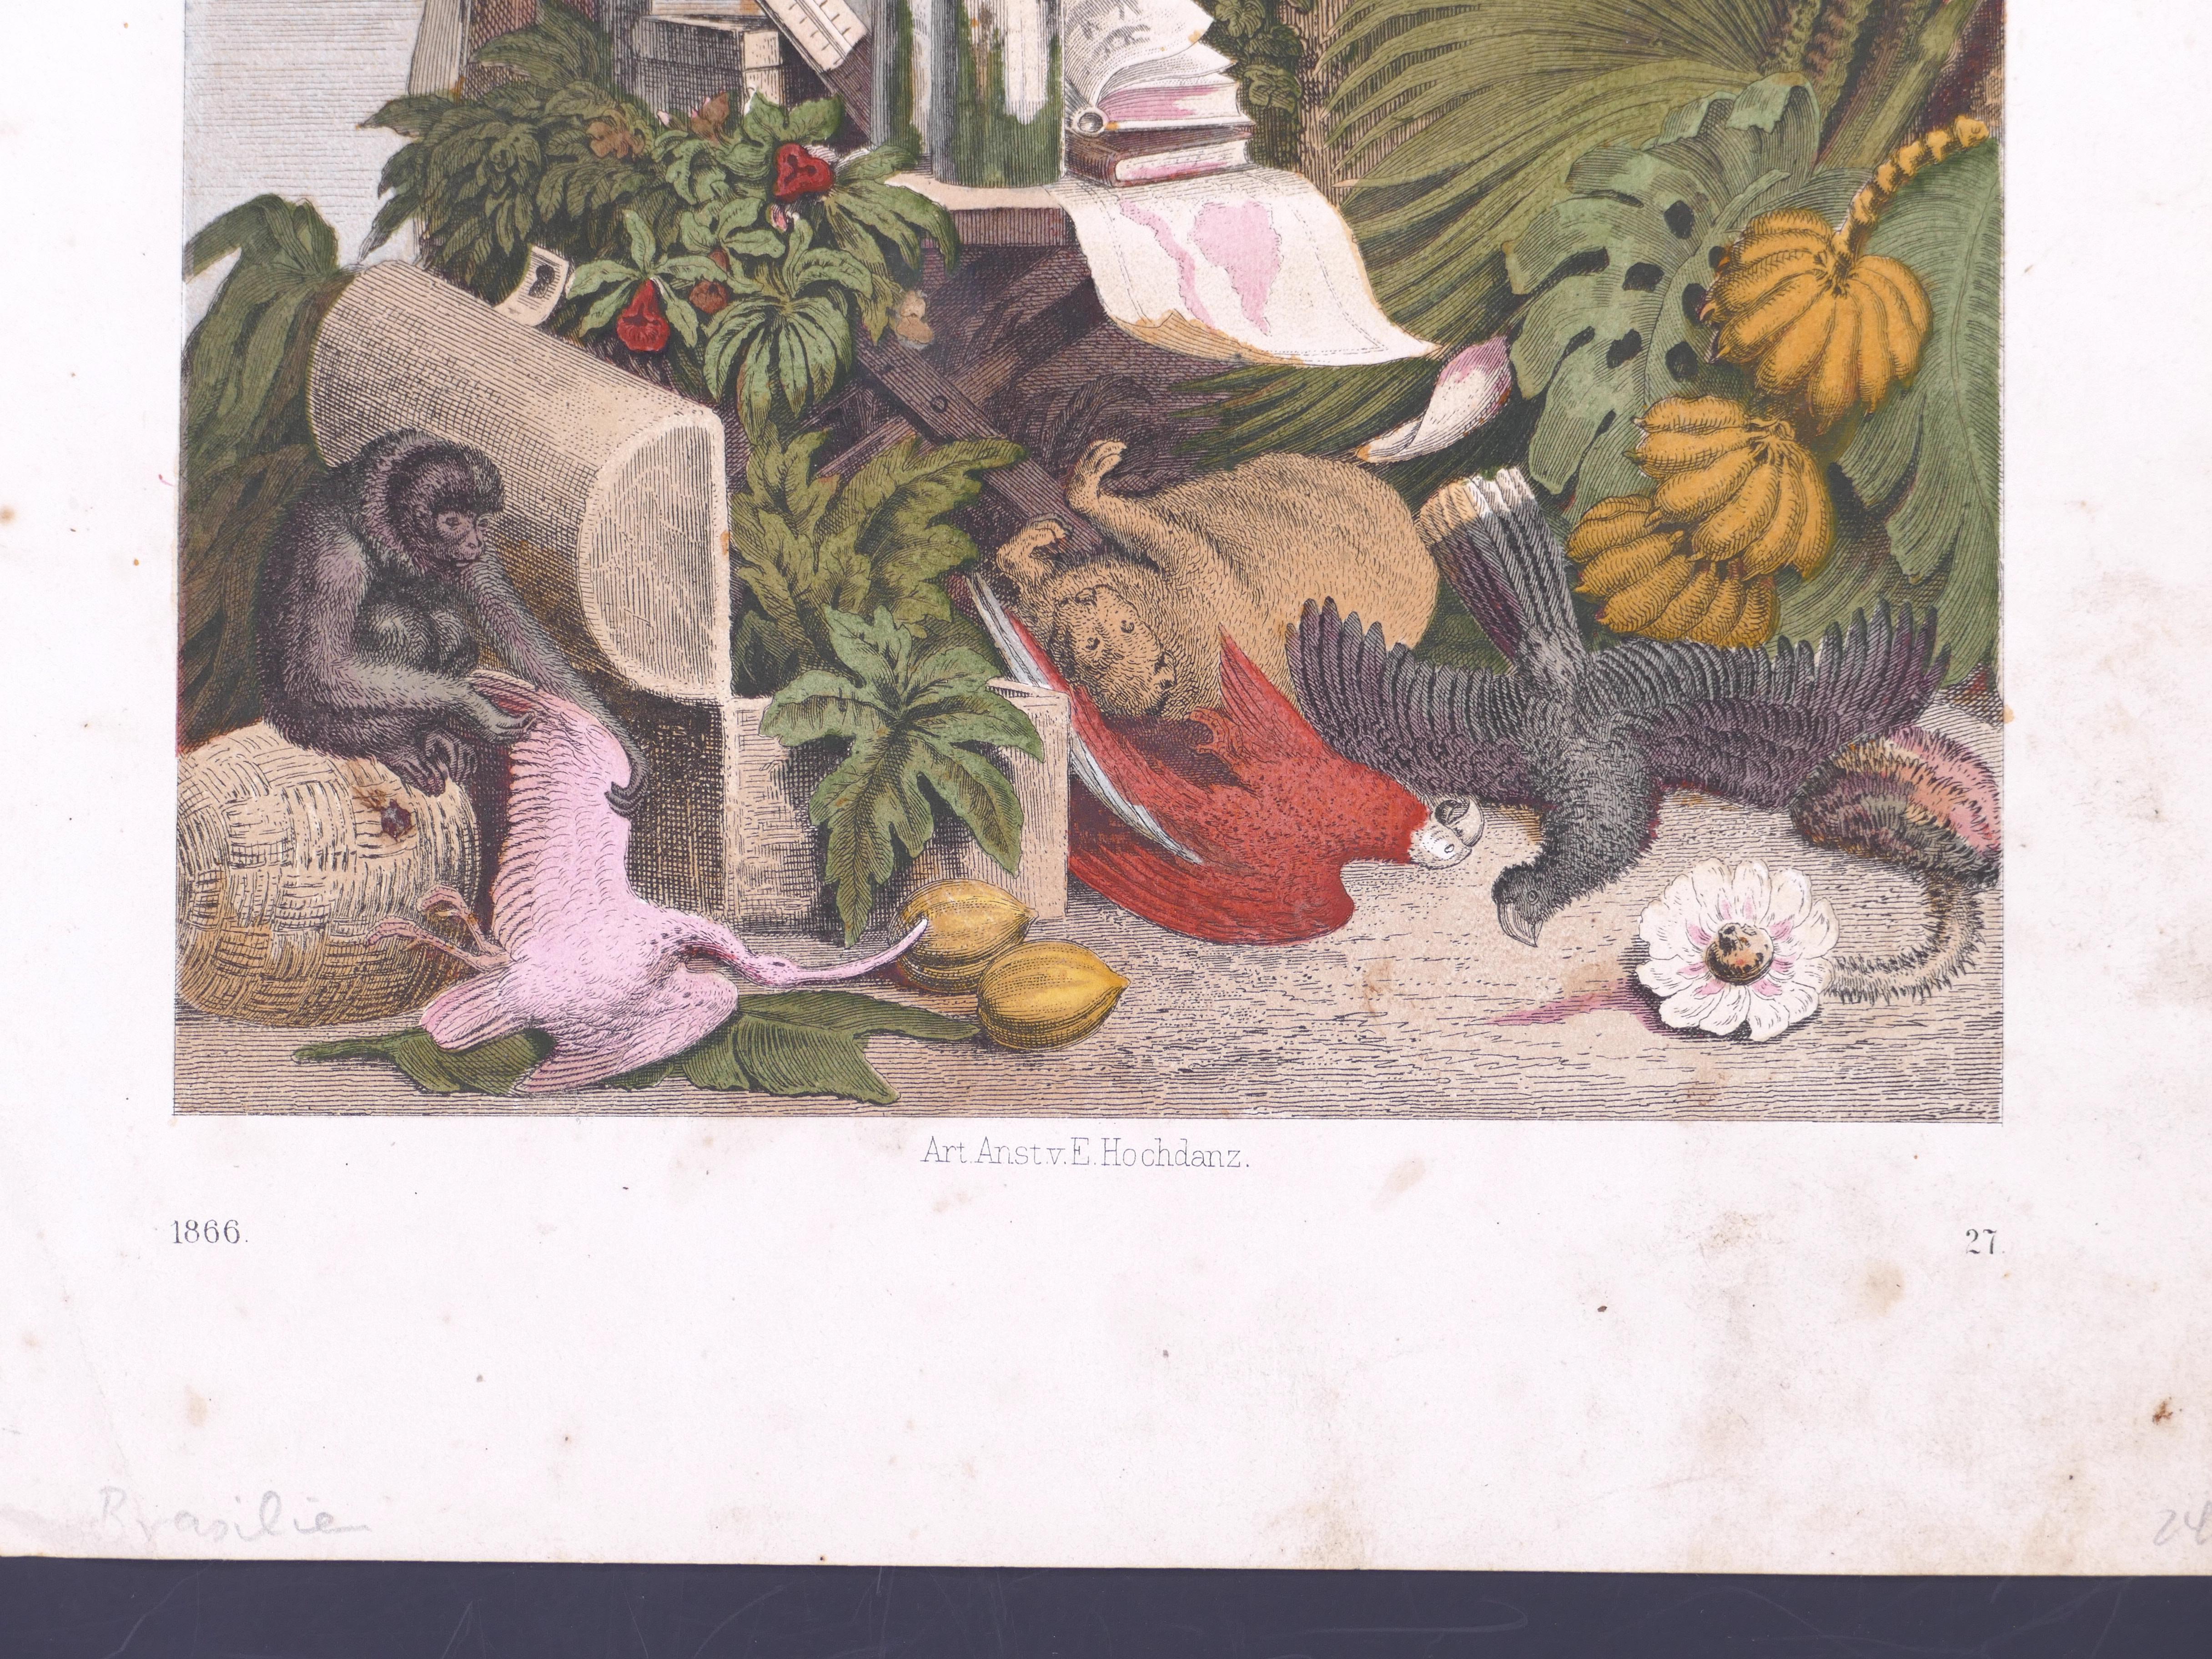 Exotic Animals - Original Lithograph by Emil Hochdanz- 1866 For Sale 2